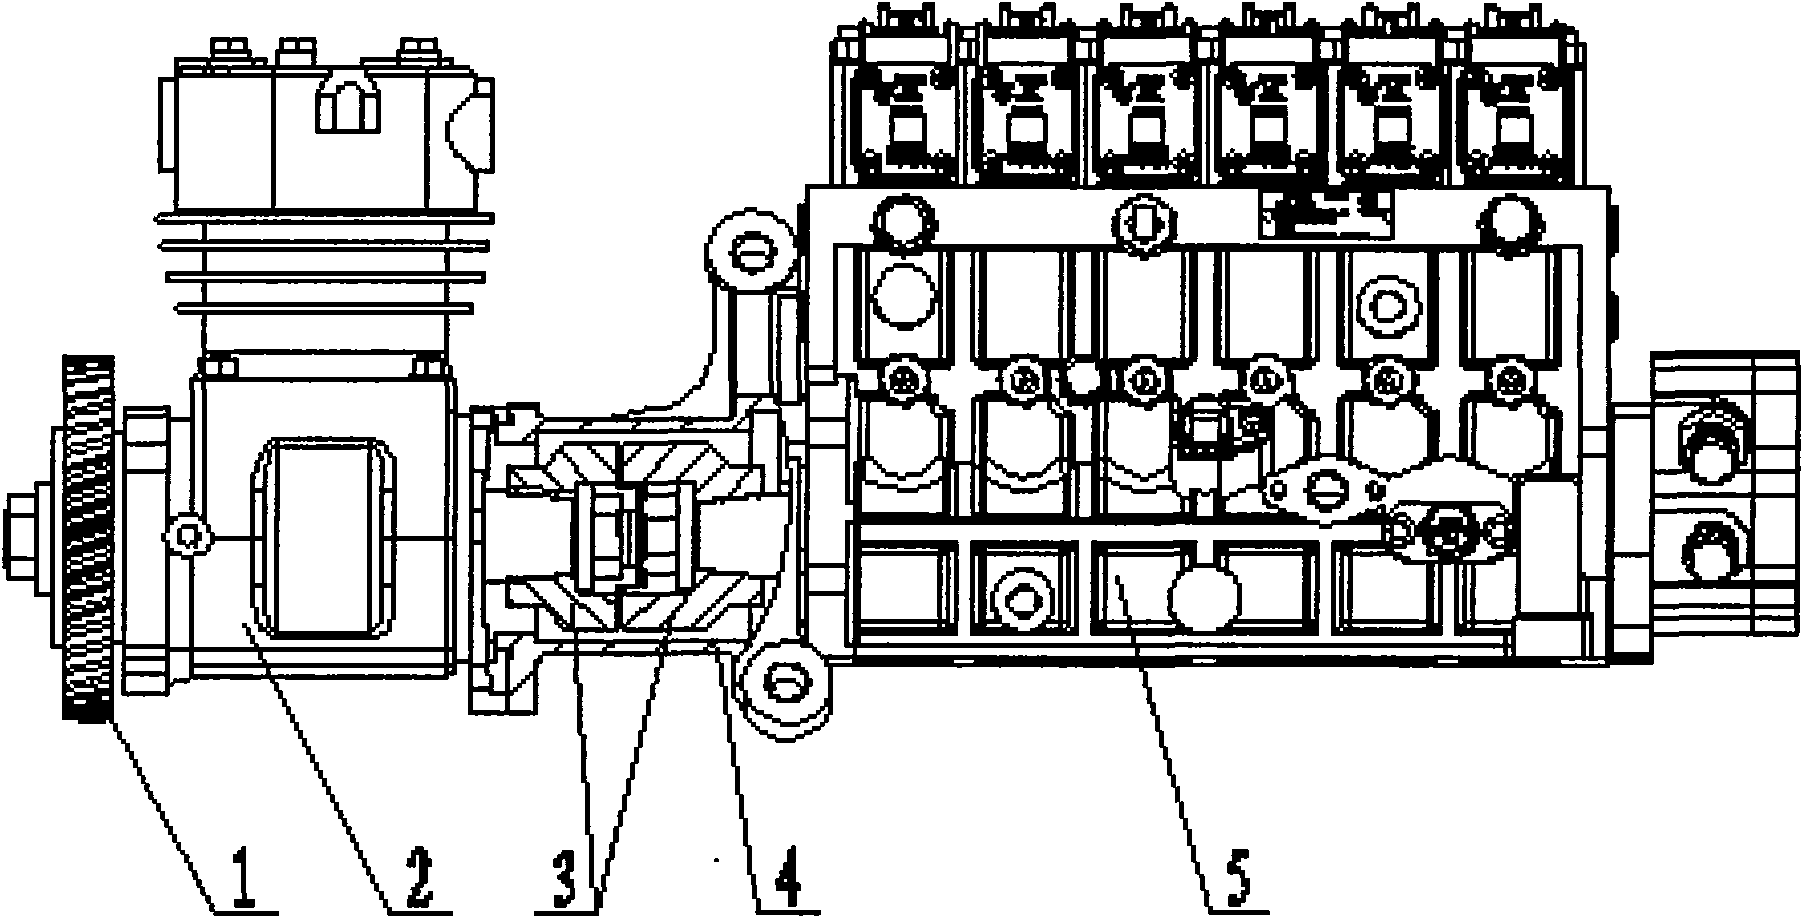 Large-torque driving device of engine